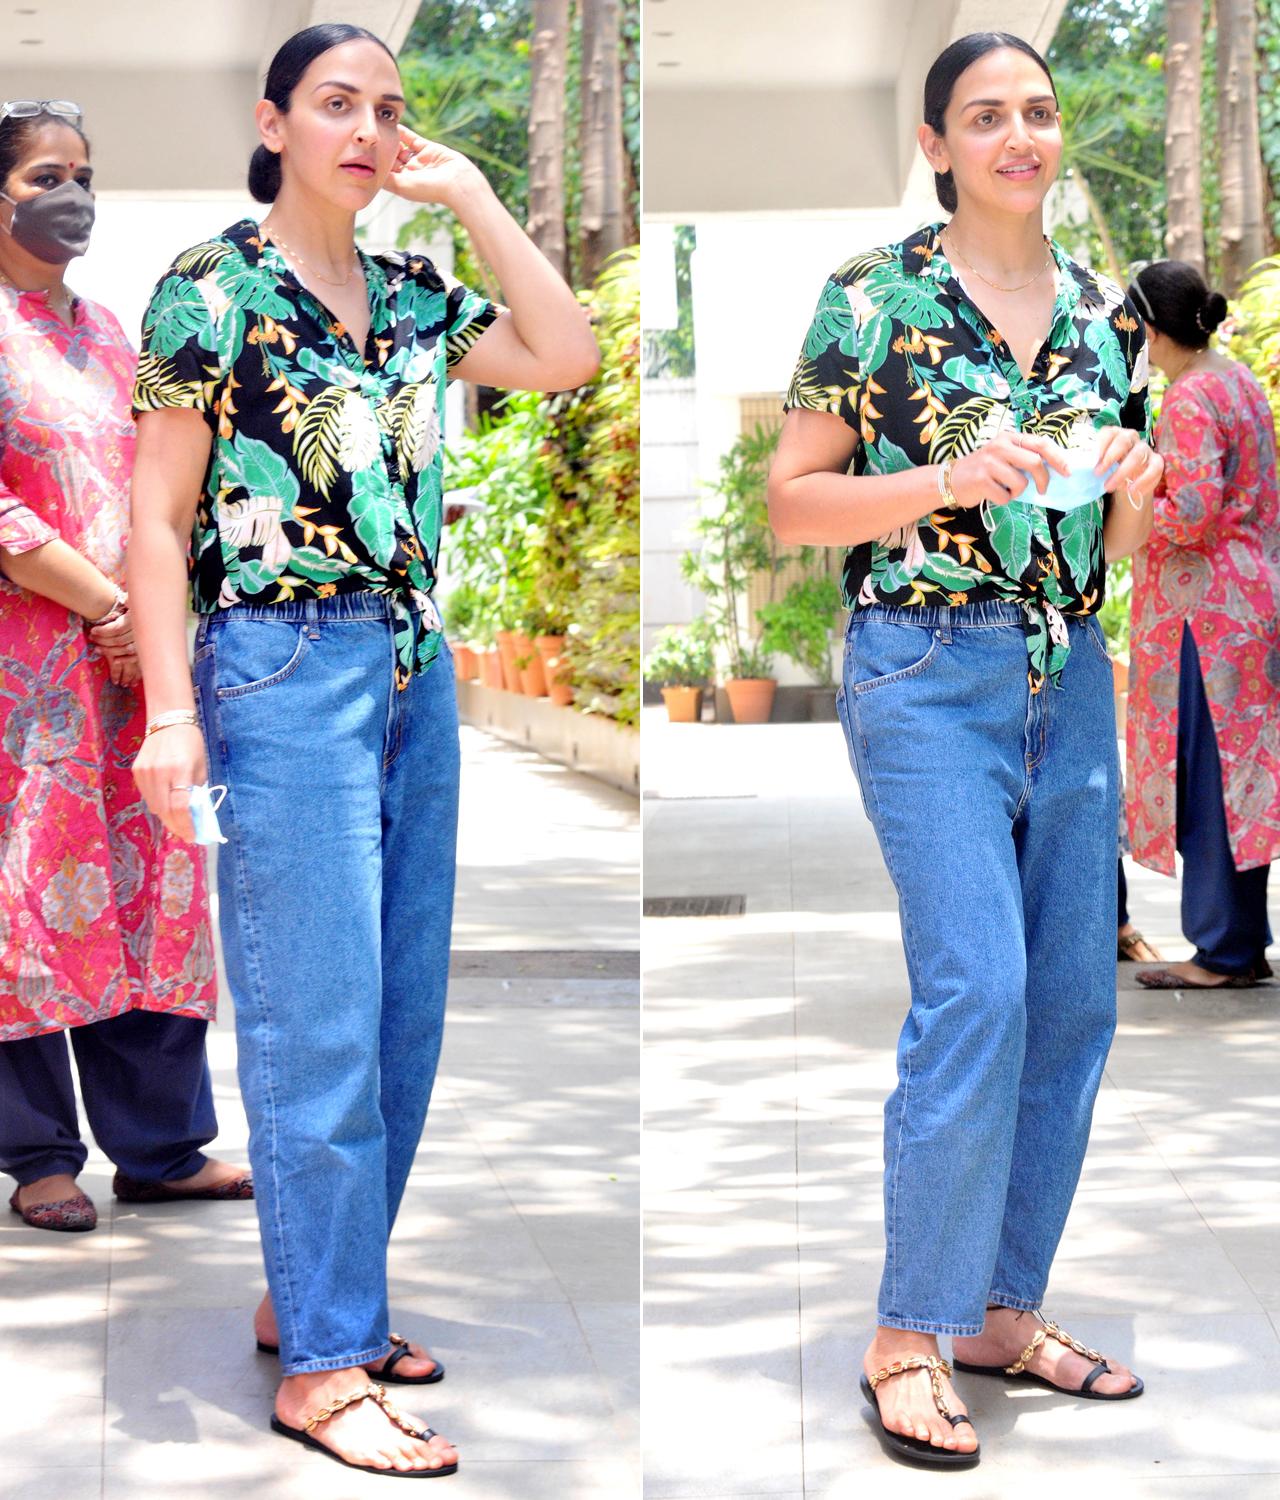 Esha Deol opted for a printed front tie-up shirt, paired with boyfriend jeans. The actress, who is a mother of two daughters, looked fir and fab, as she posed for the paparazzi for pictures.